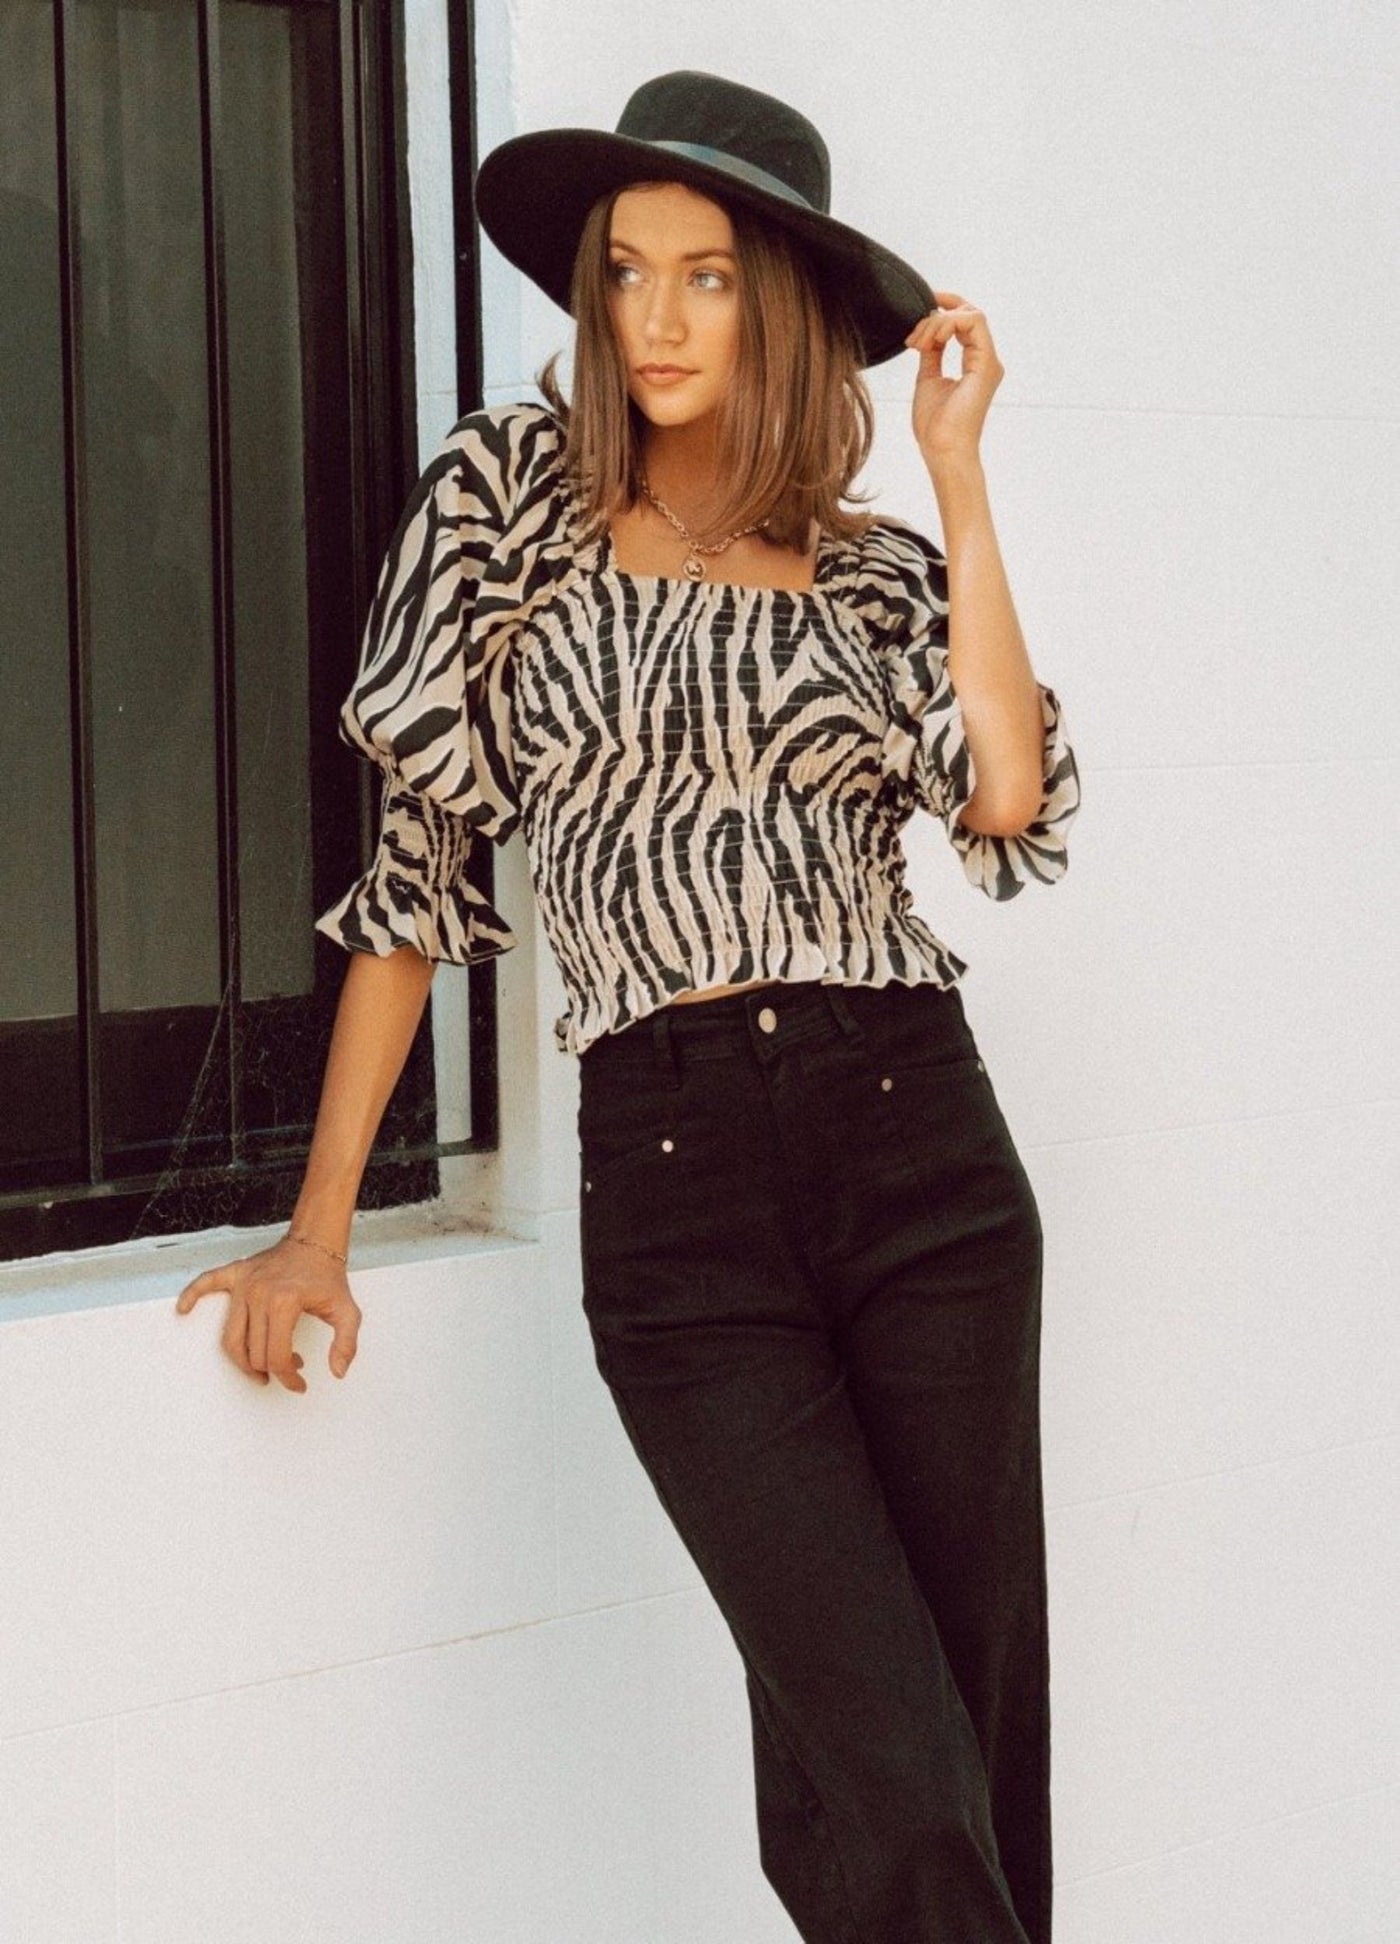 Woman wearing animal print top with black hat and black jeans